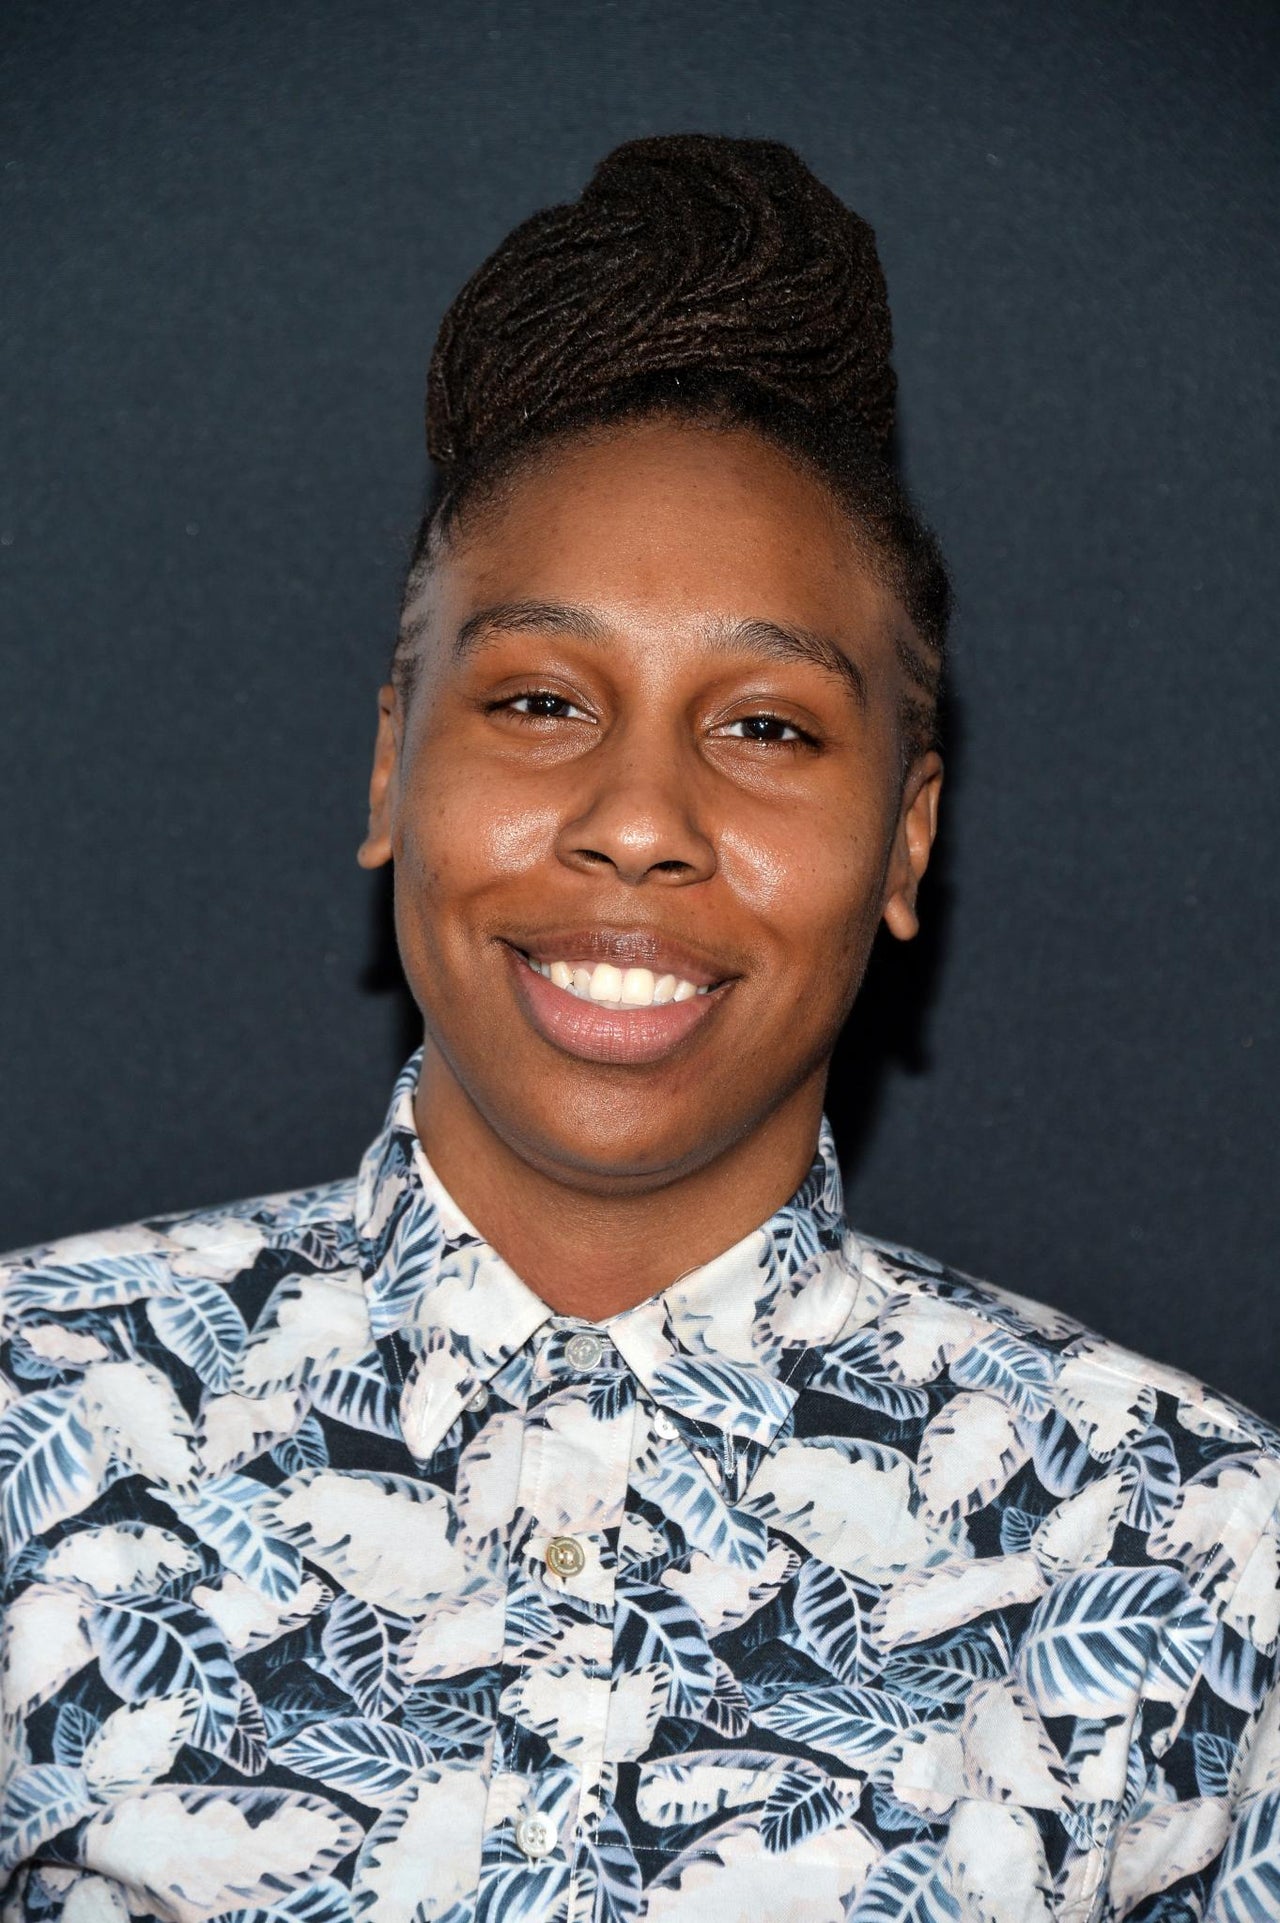 Major: Lena Waithe Is The First Black Woman Nominated For A ...